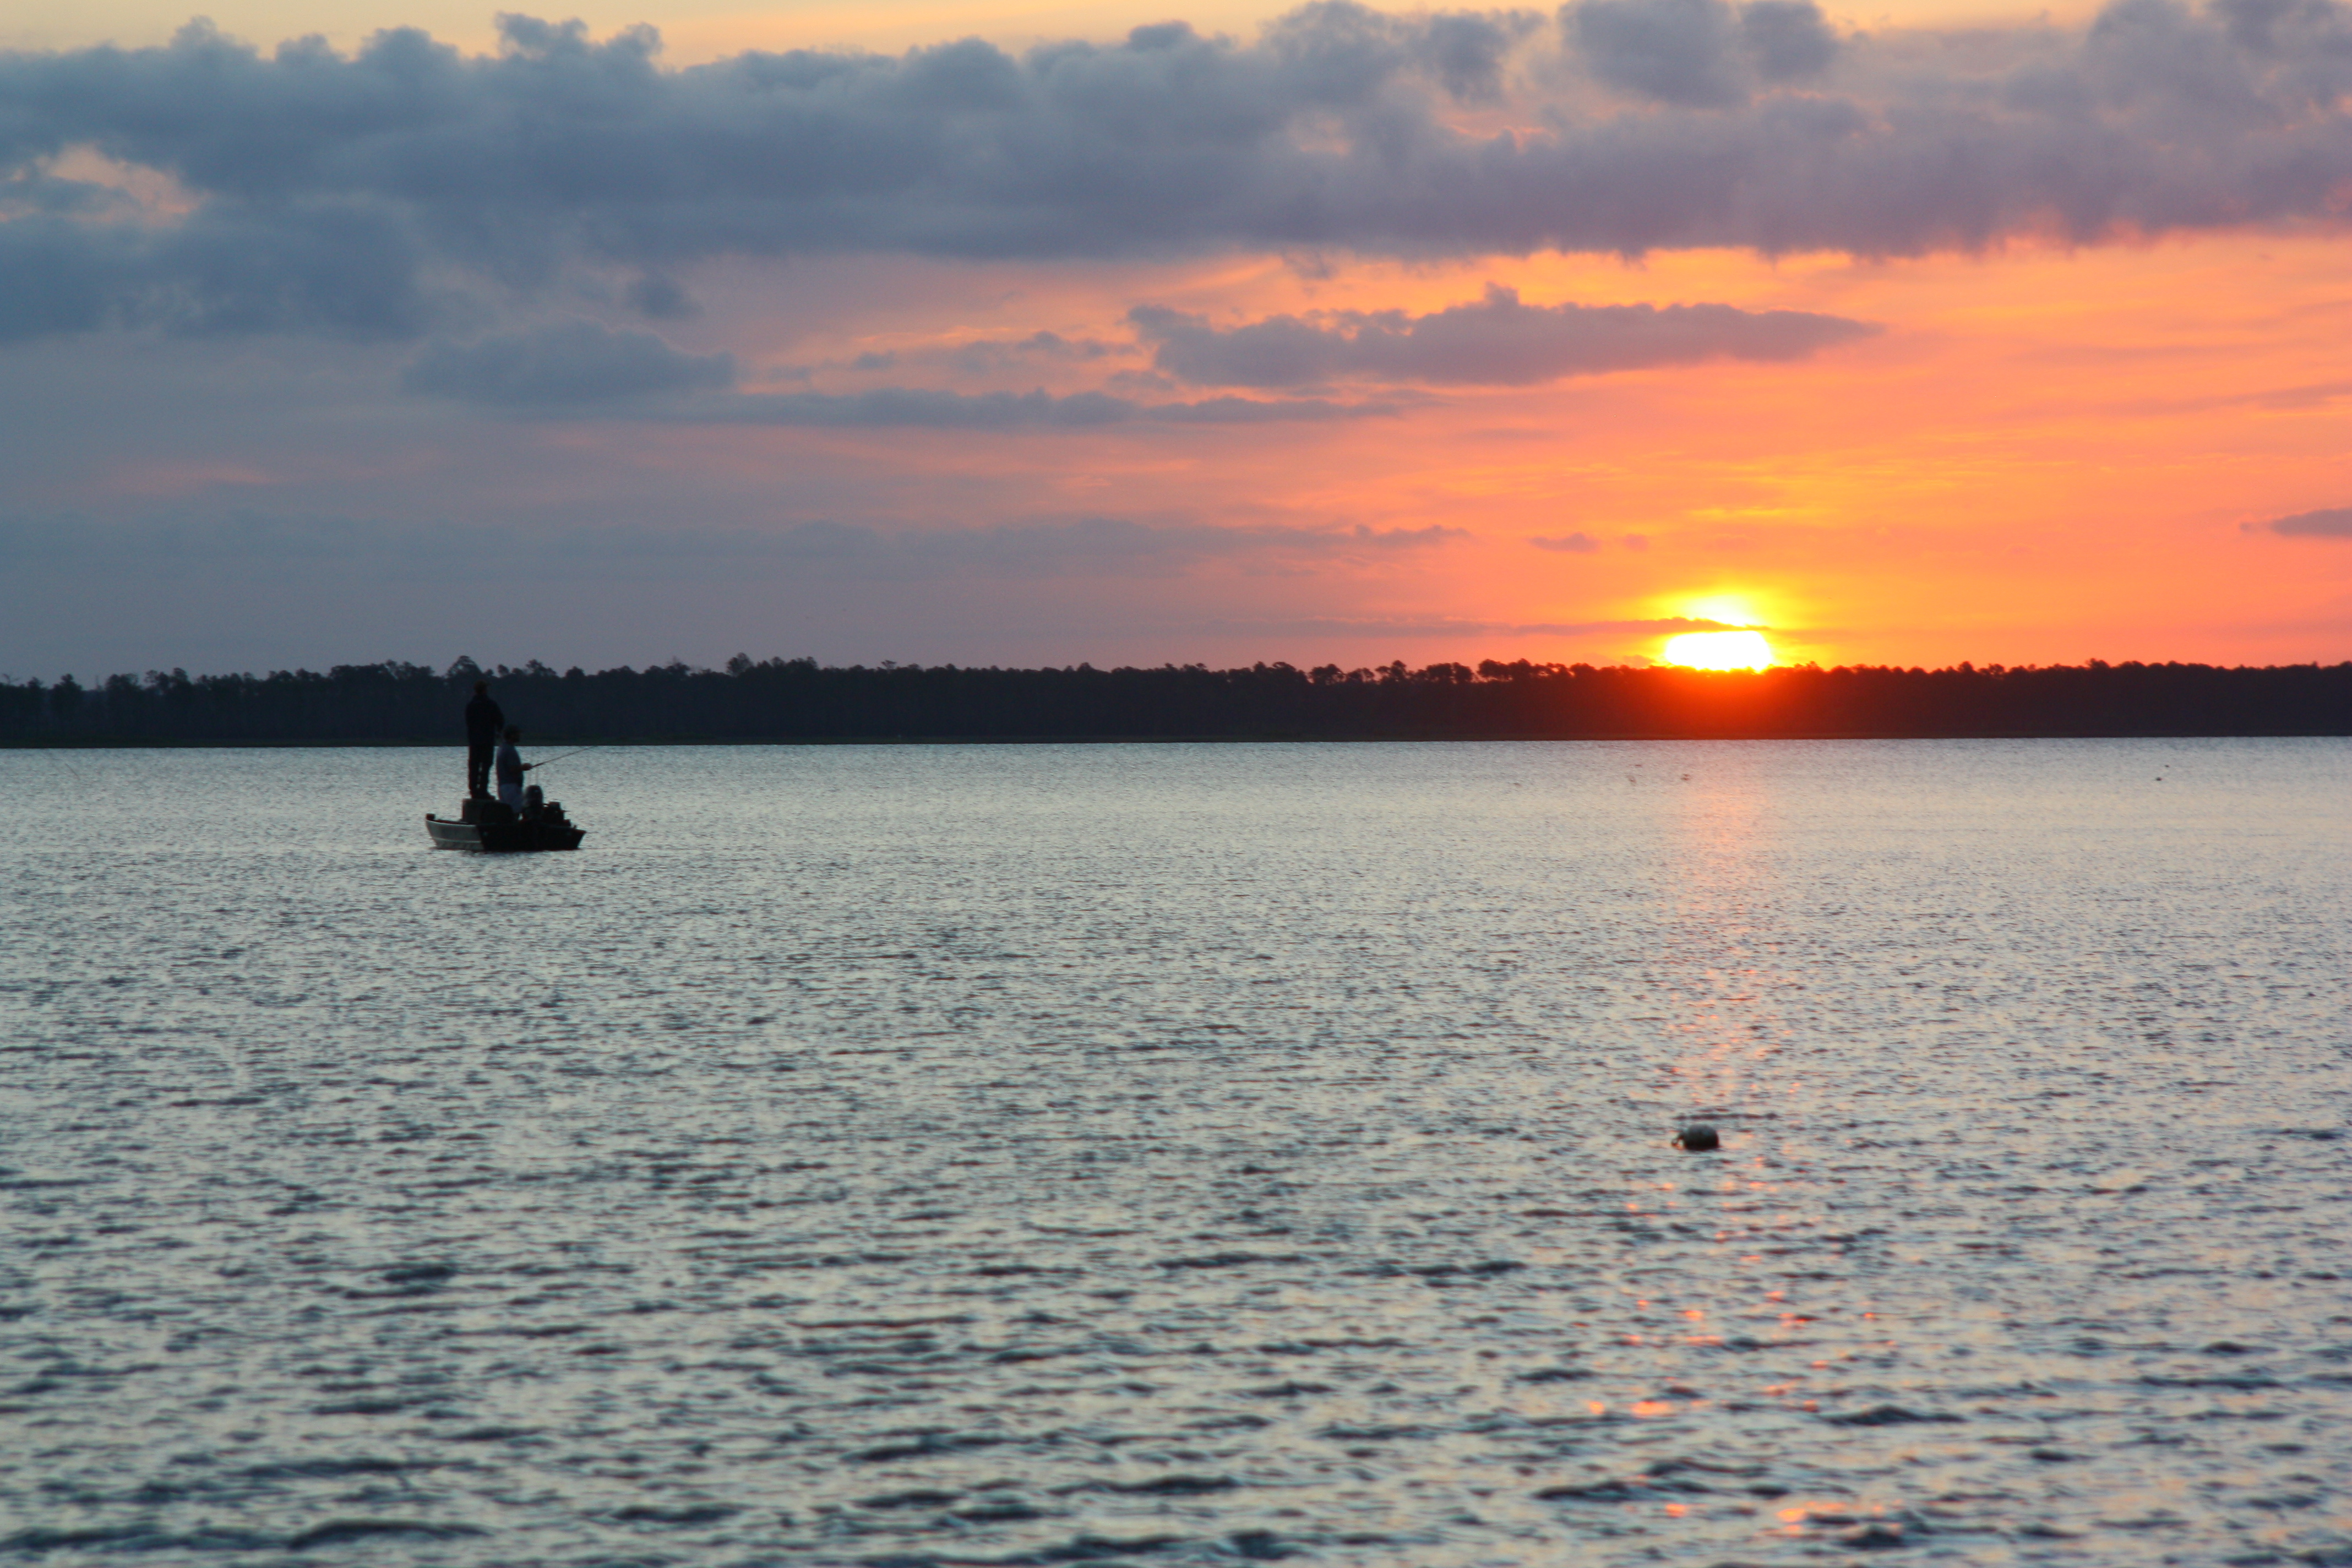 To find some perfect Mobile Bay fishing spots check out the western shore.